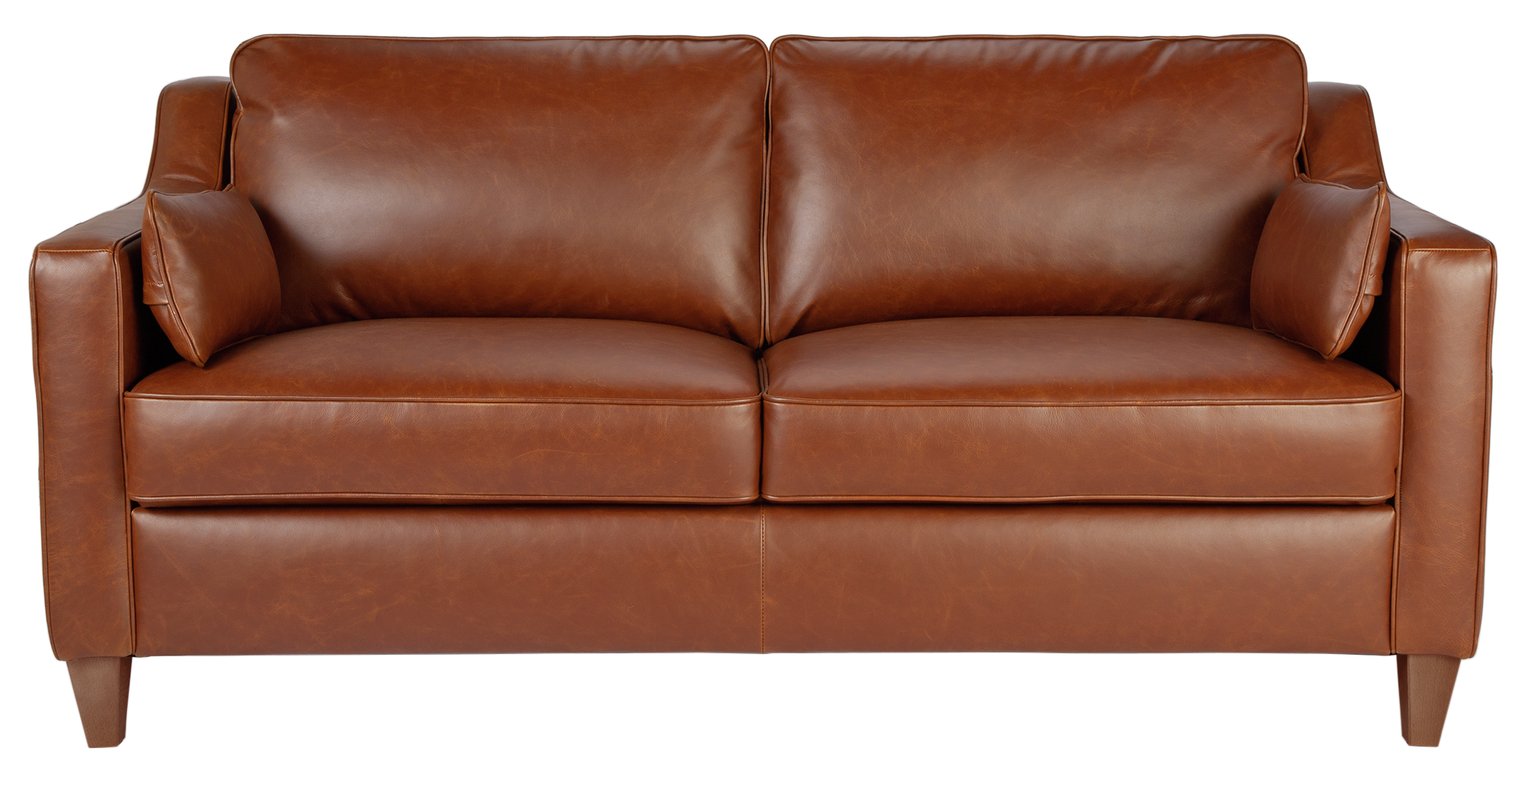 tosi leather sofa review